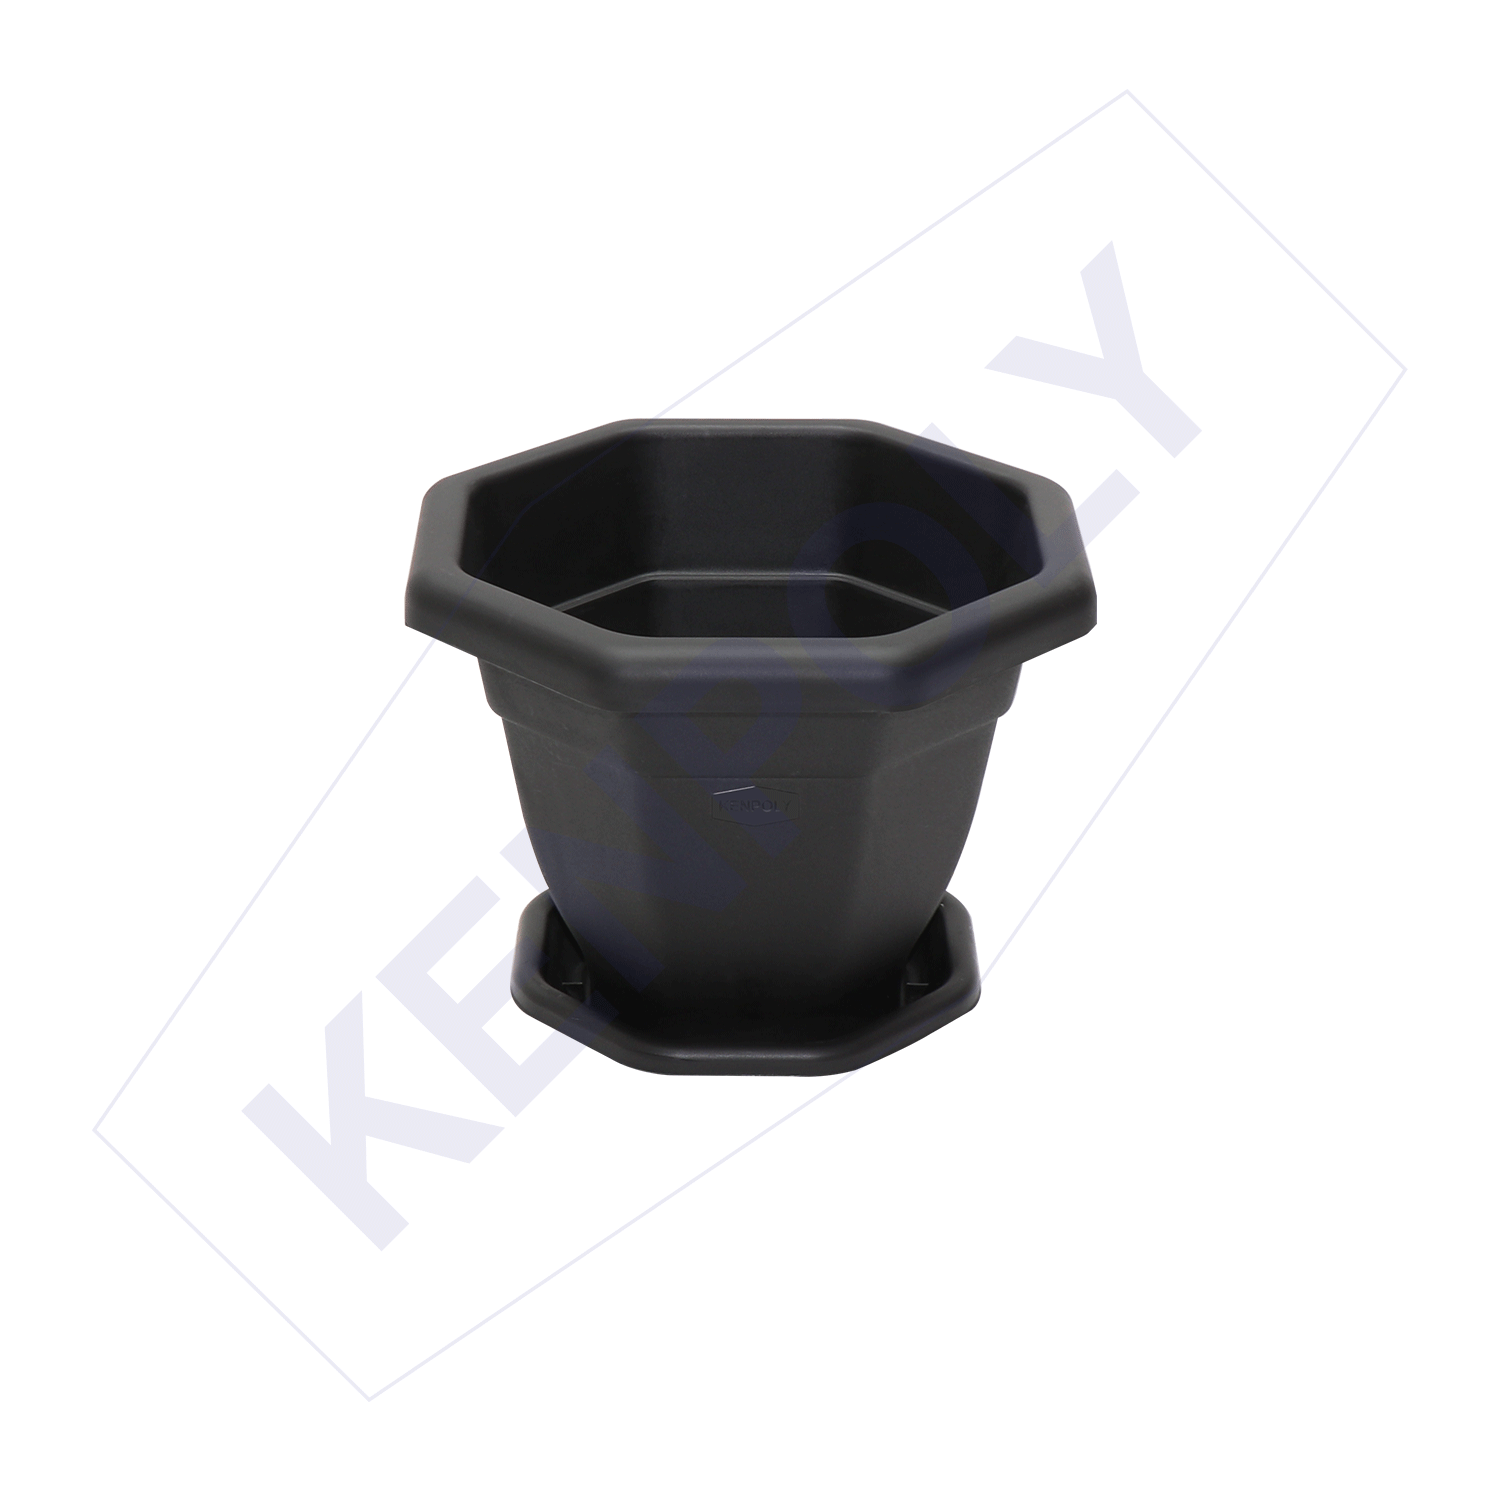 Kenpoly Flower Pot - Planter 1 with Dish H200 x Dia268 mm 4ltrs